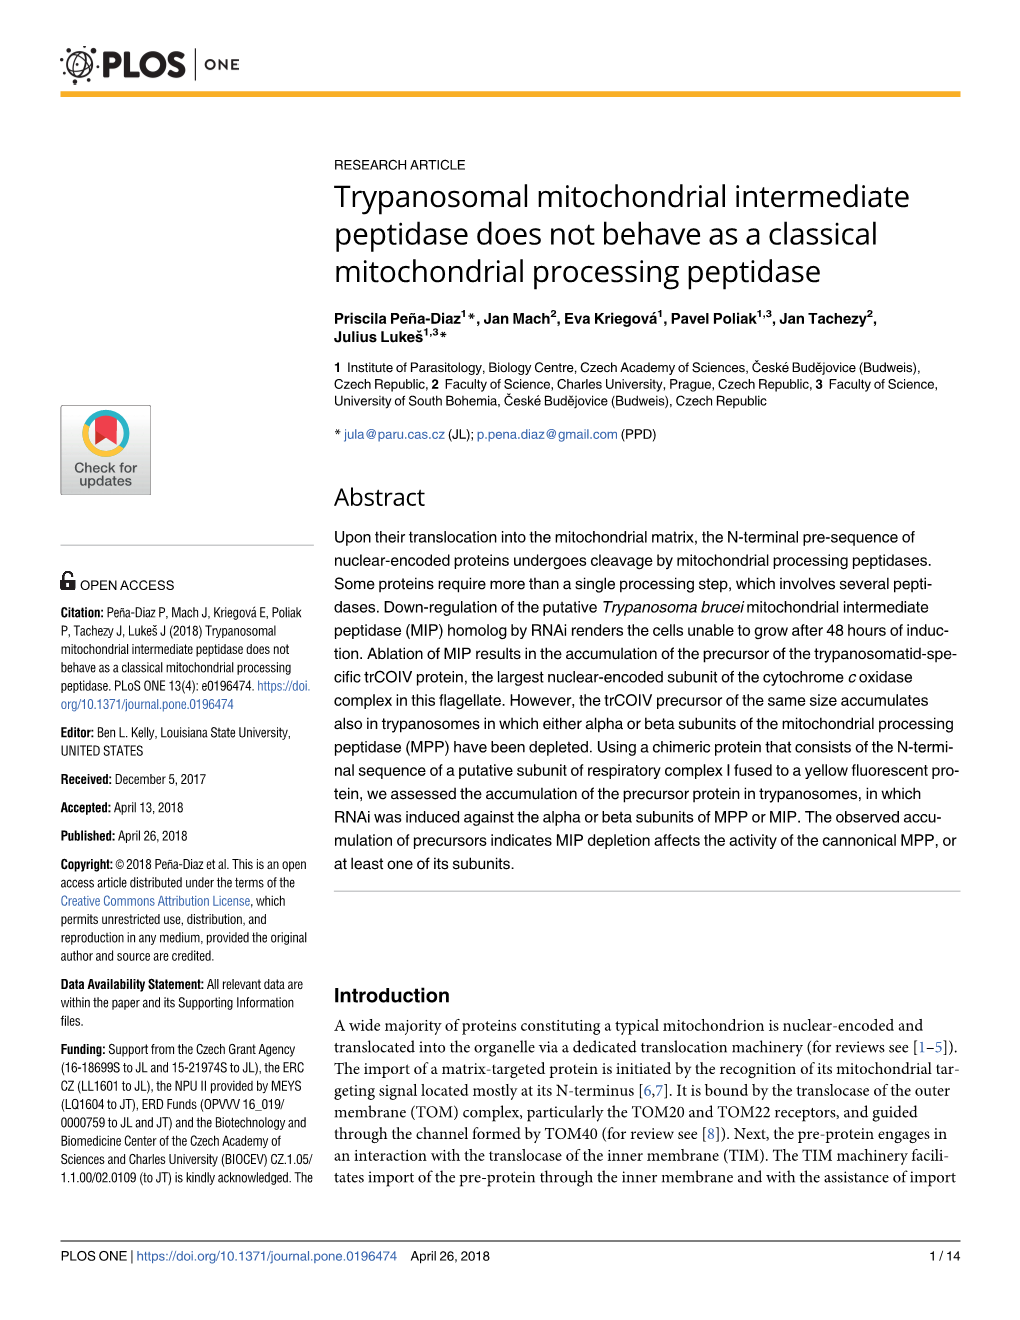 Trypanosomal Mitochondrial Intermediate Peptidase Does Not Behave As a Classical Mitochondrial Processing Peptidase